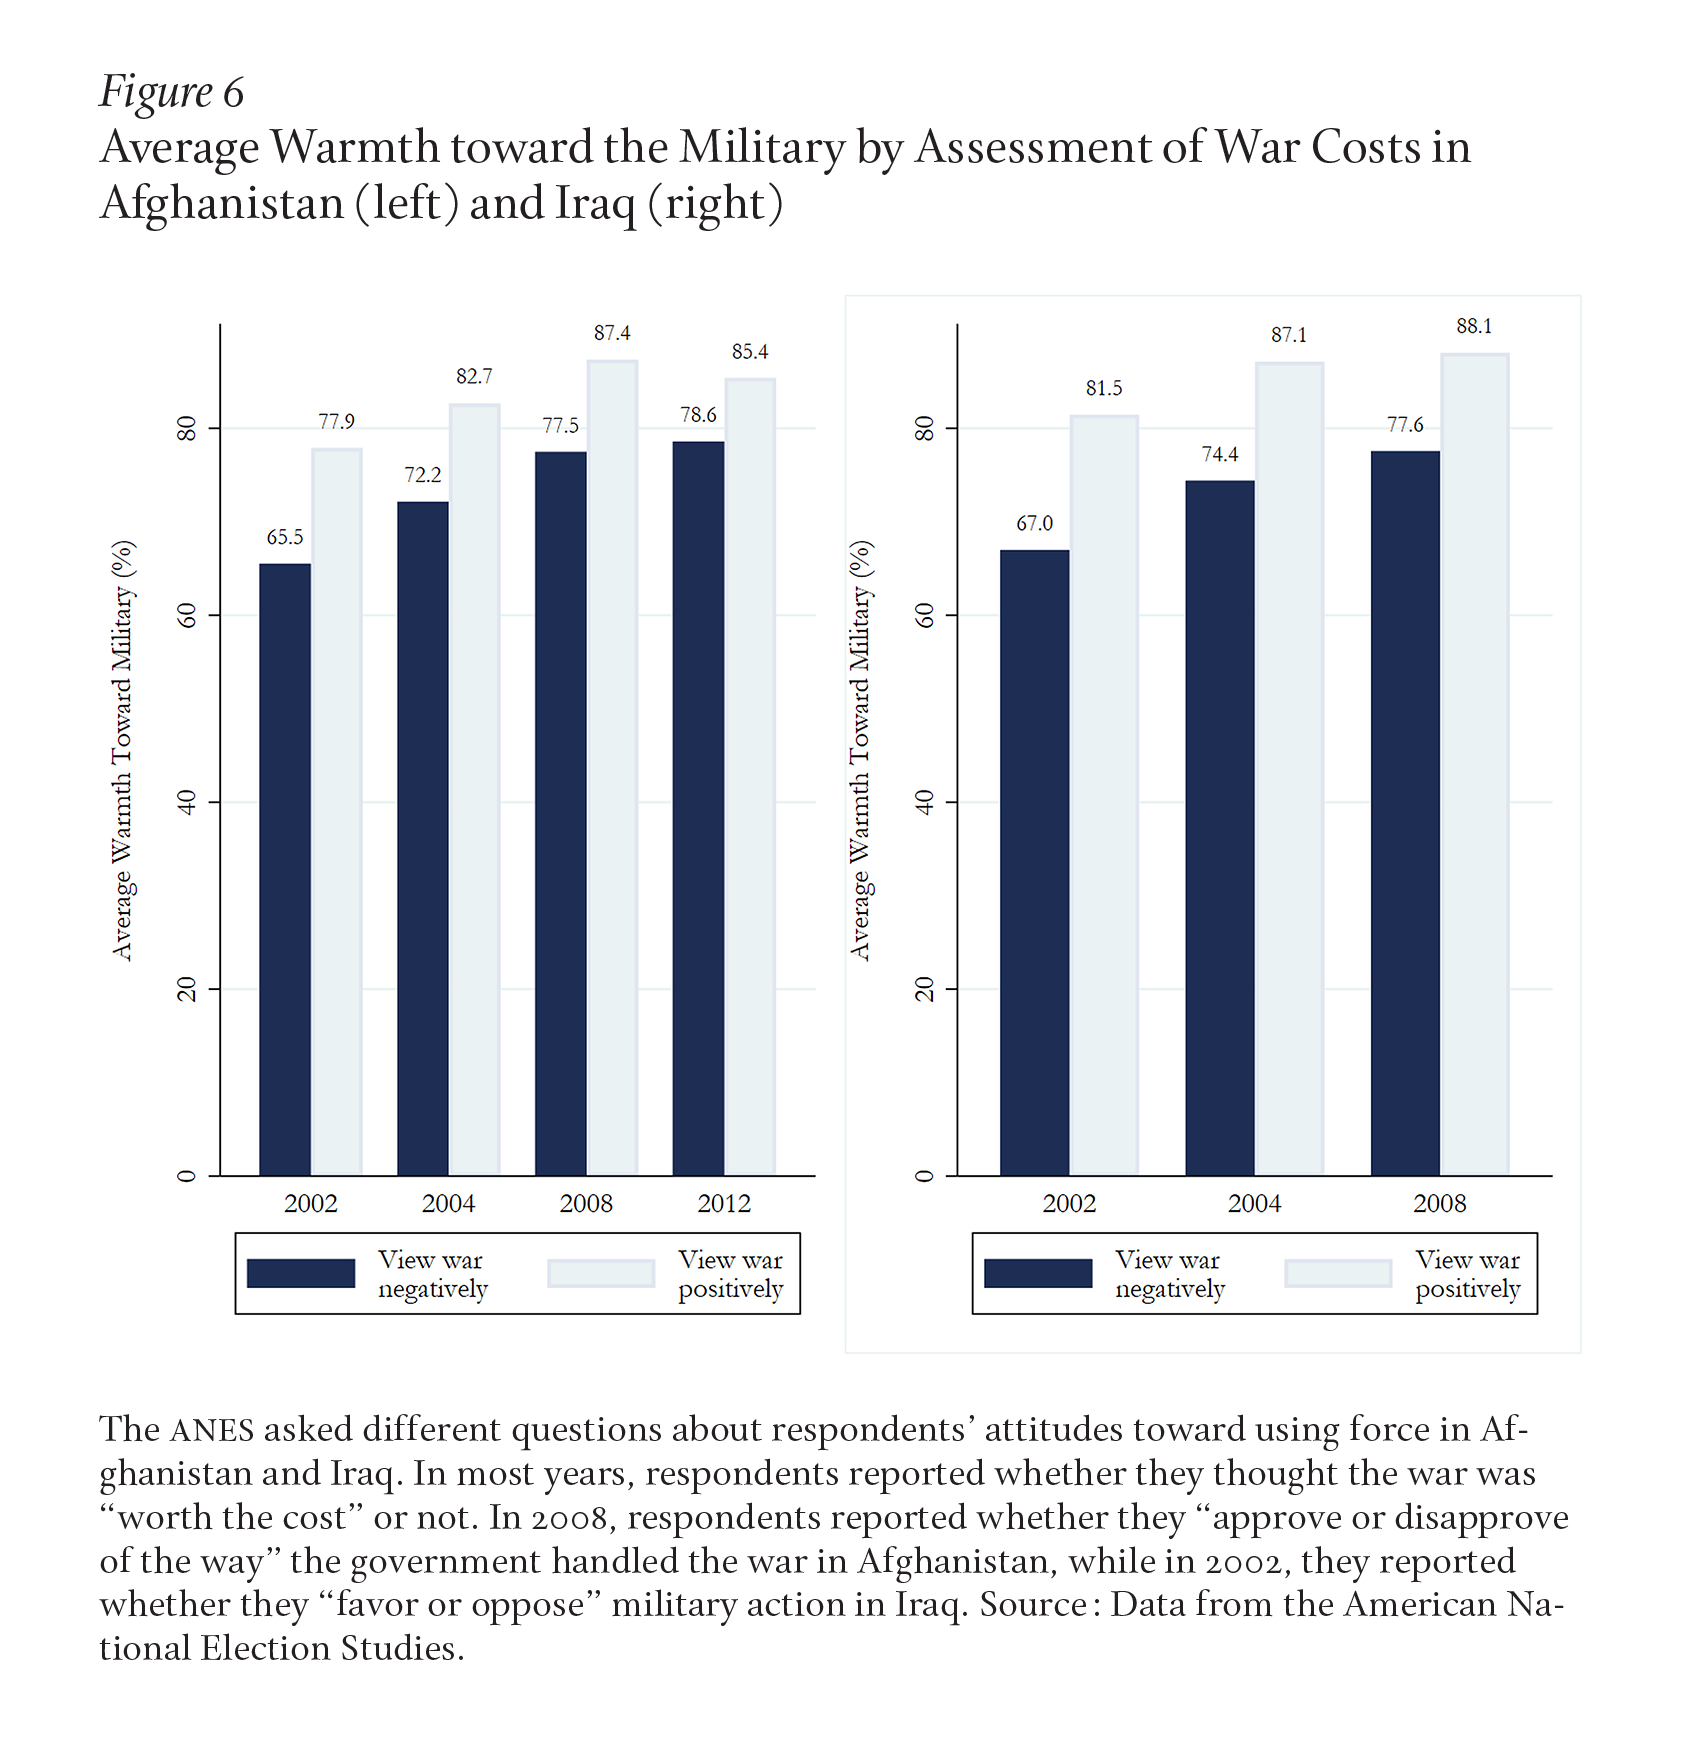 Figure 6 shows that, compared with the data gathered during the Vietnam War, respondents with both negative and positive views of the wars in Iraq and Afghanistant feel warmer toward the military now rather than at the start of those wars.